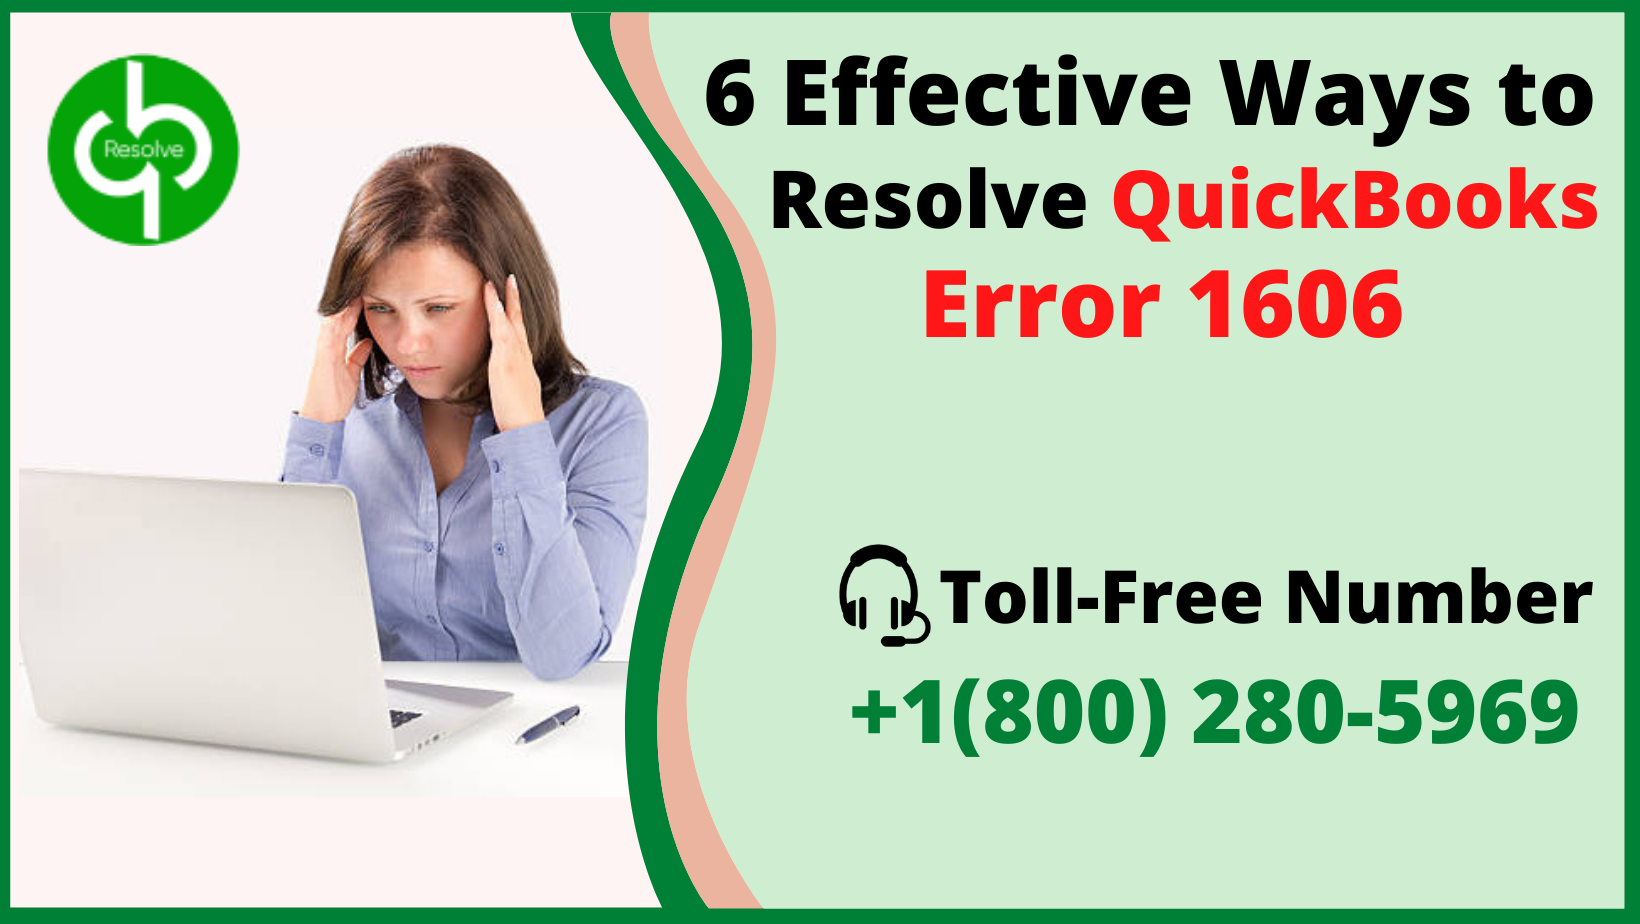 How to get rid of QuickBooks Error 1606? Here is the solution